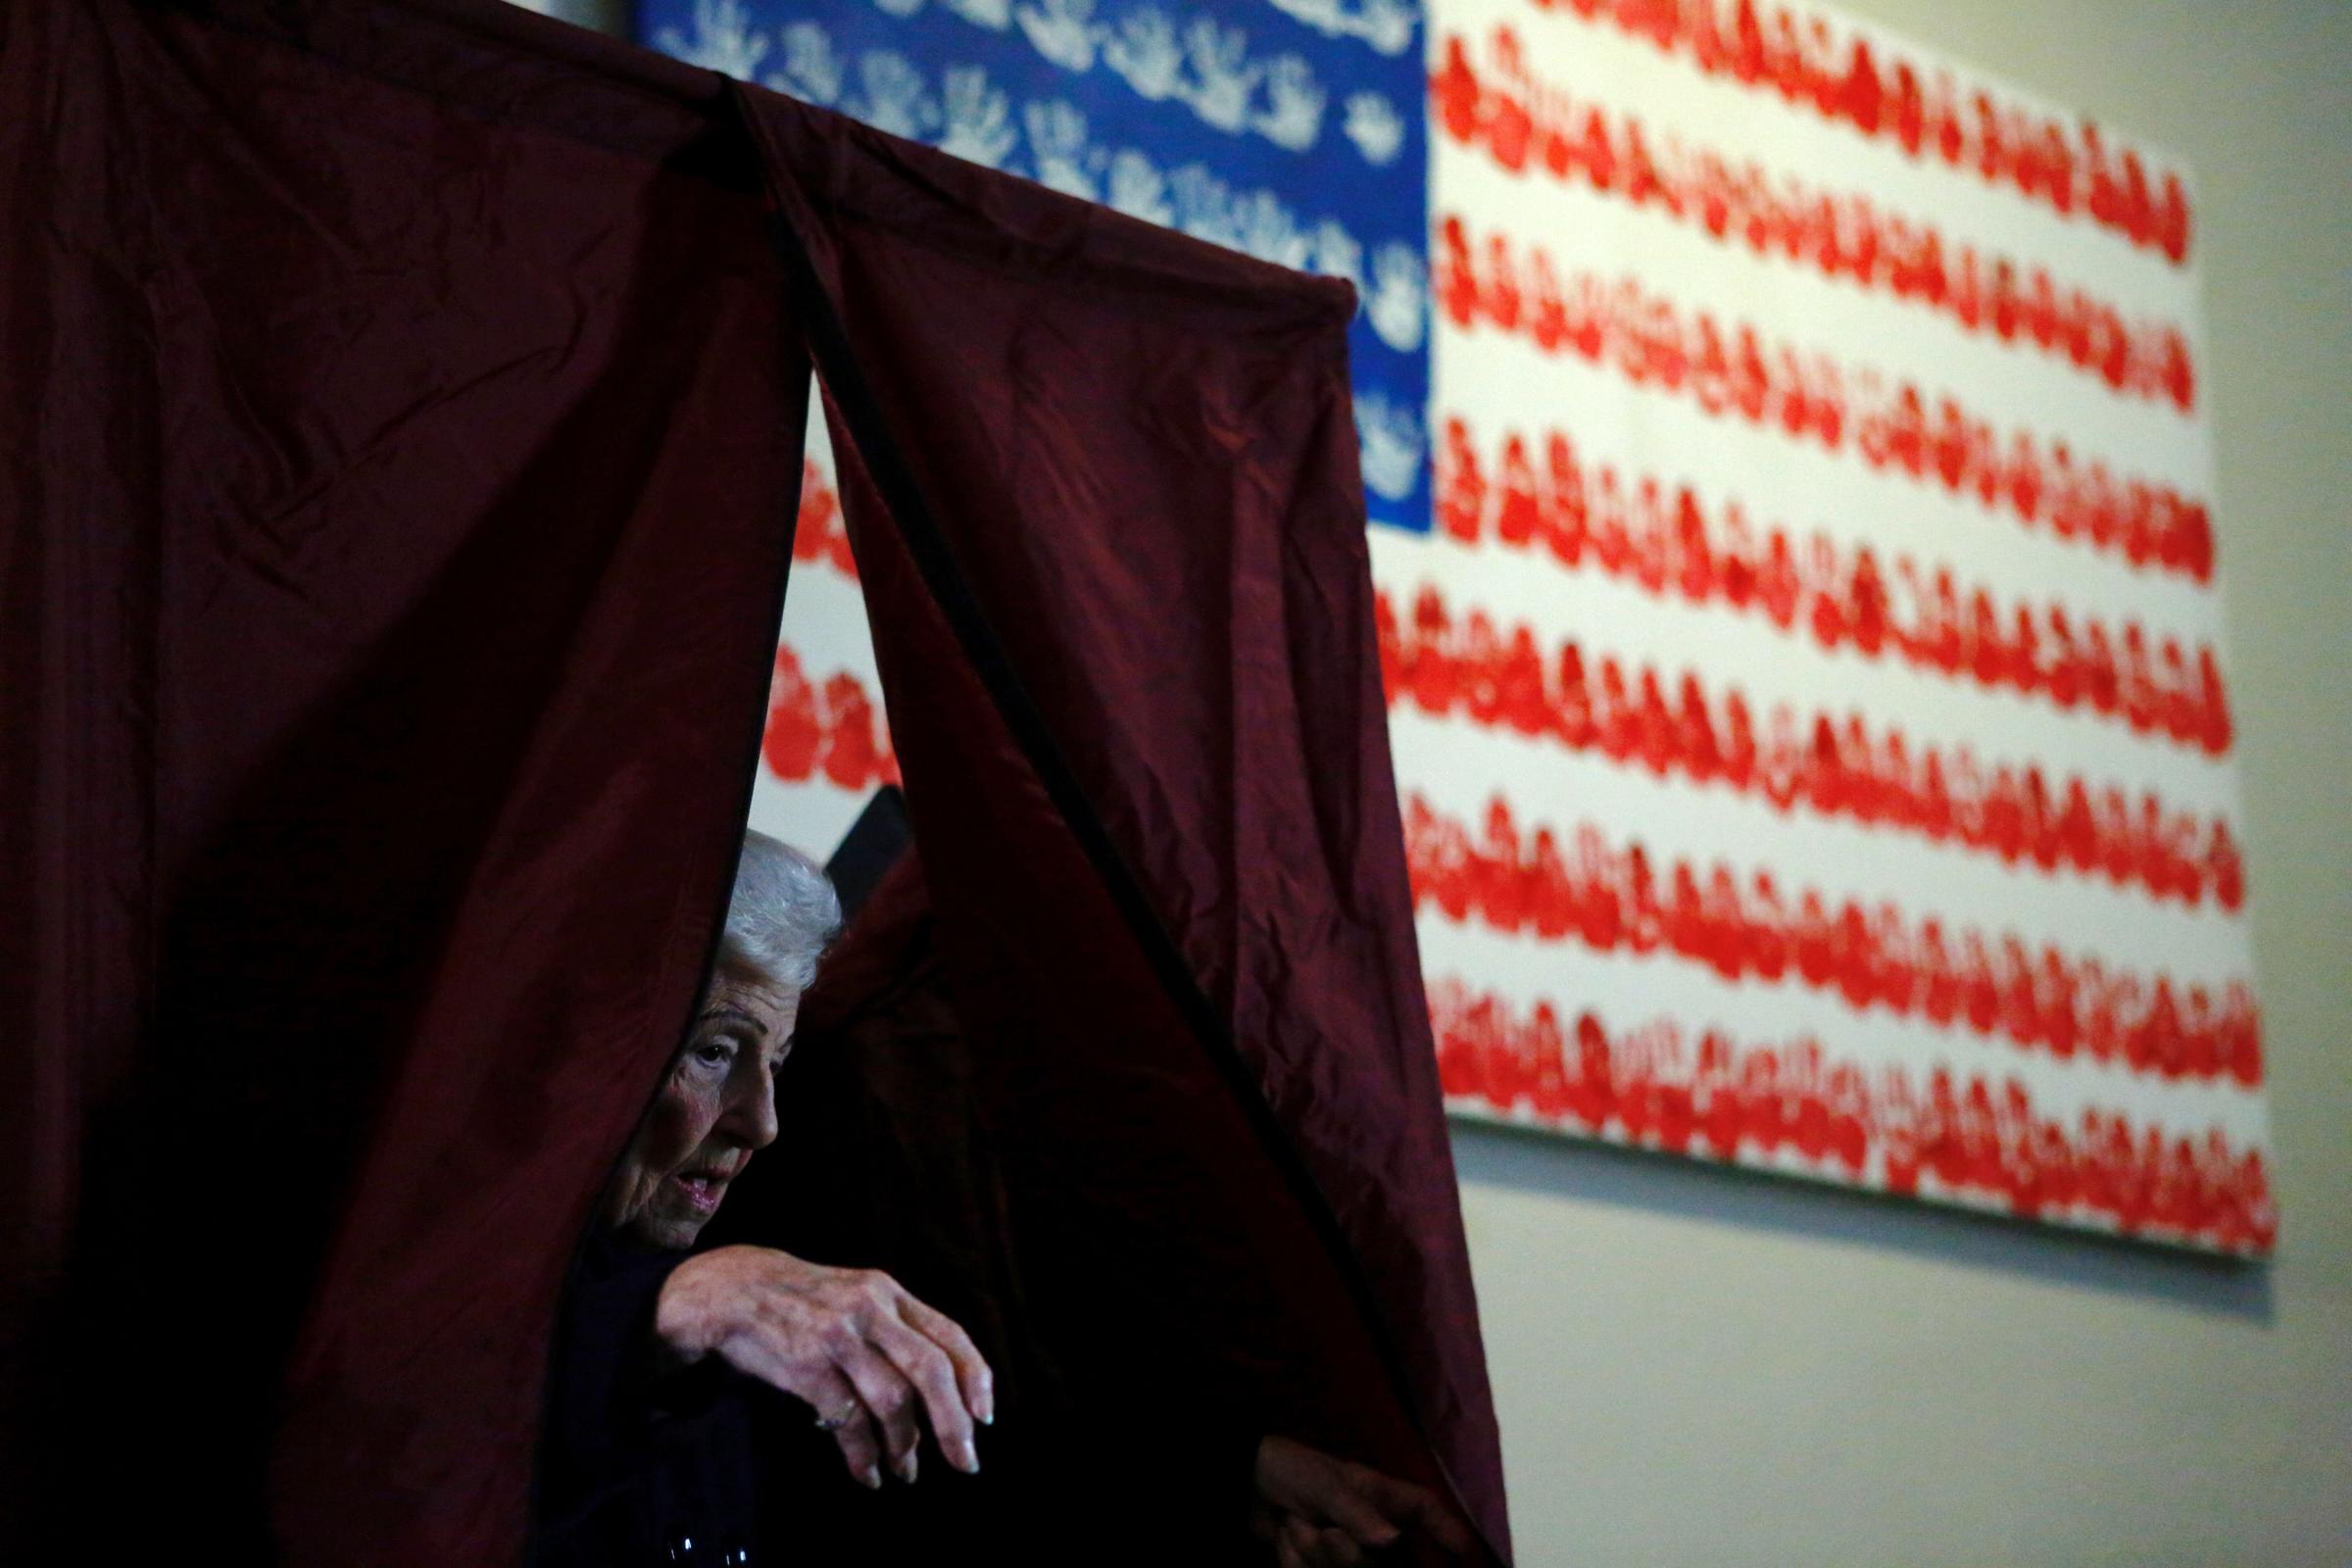 A woman exits a polling station after voting in the presidential election in Newport, New Jersey.